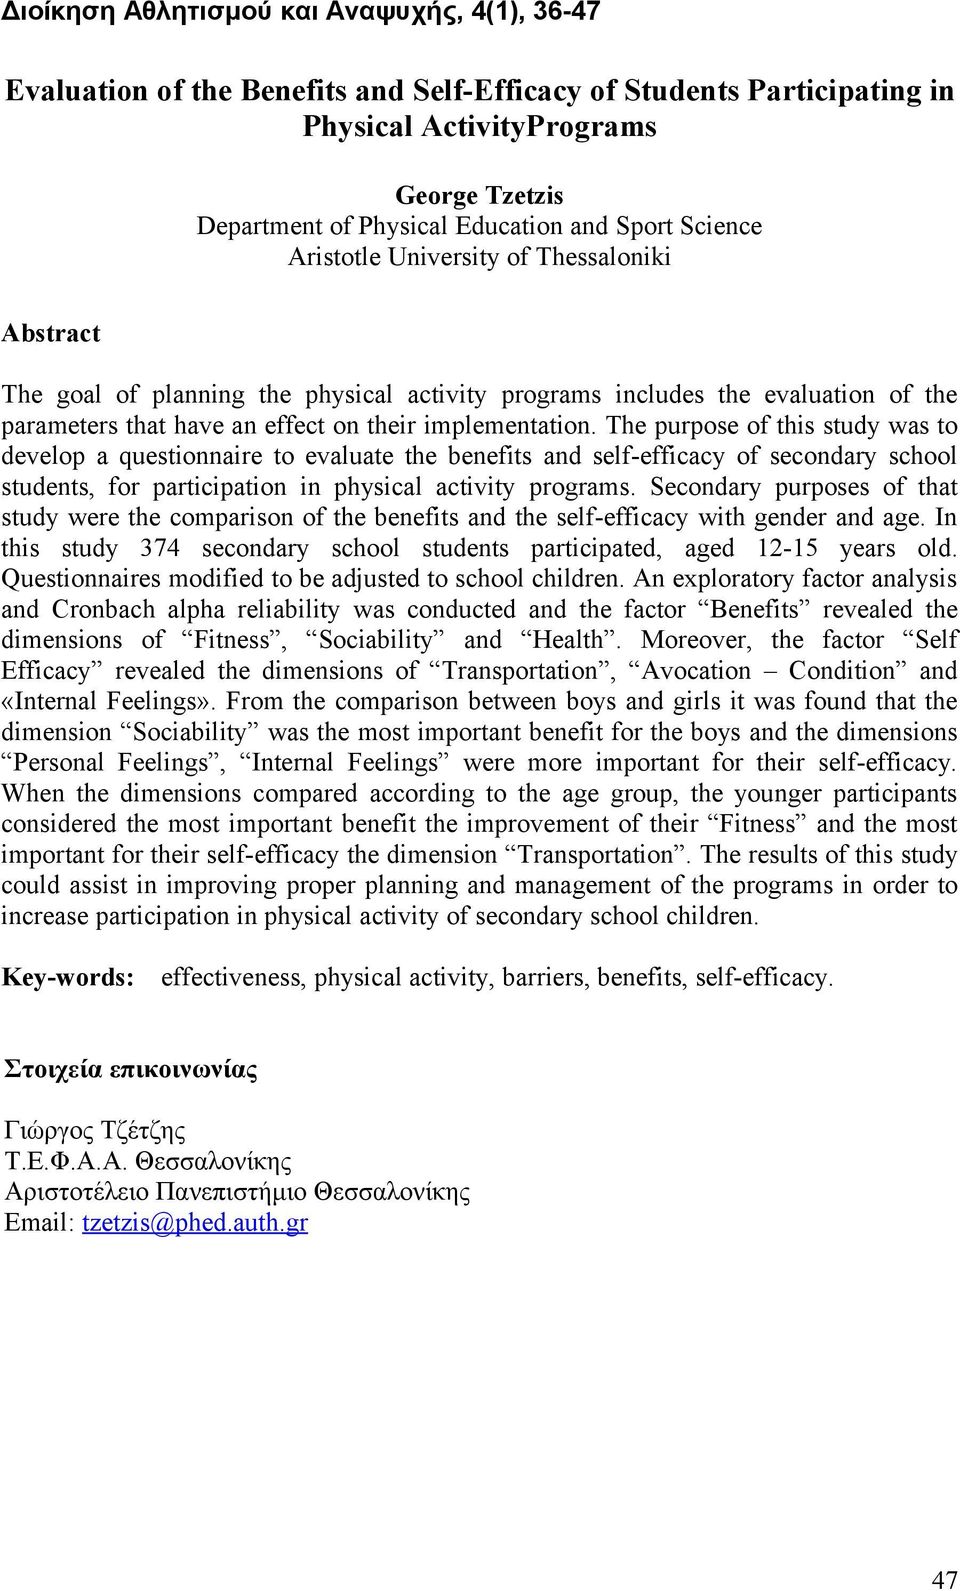 The purpose of this study was to develop a questionnaire to evaluate the benefits and self-efficacy of secondary school students, for participation in physical activity programs.